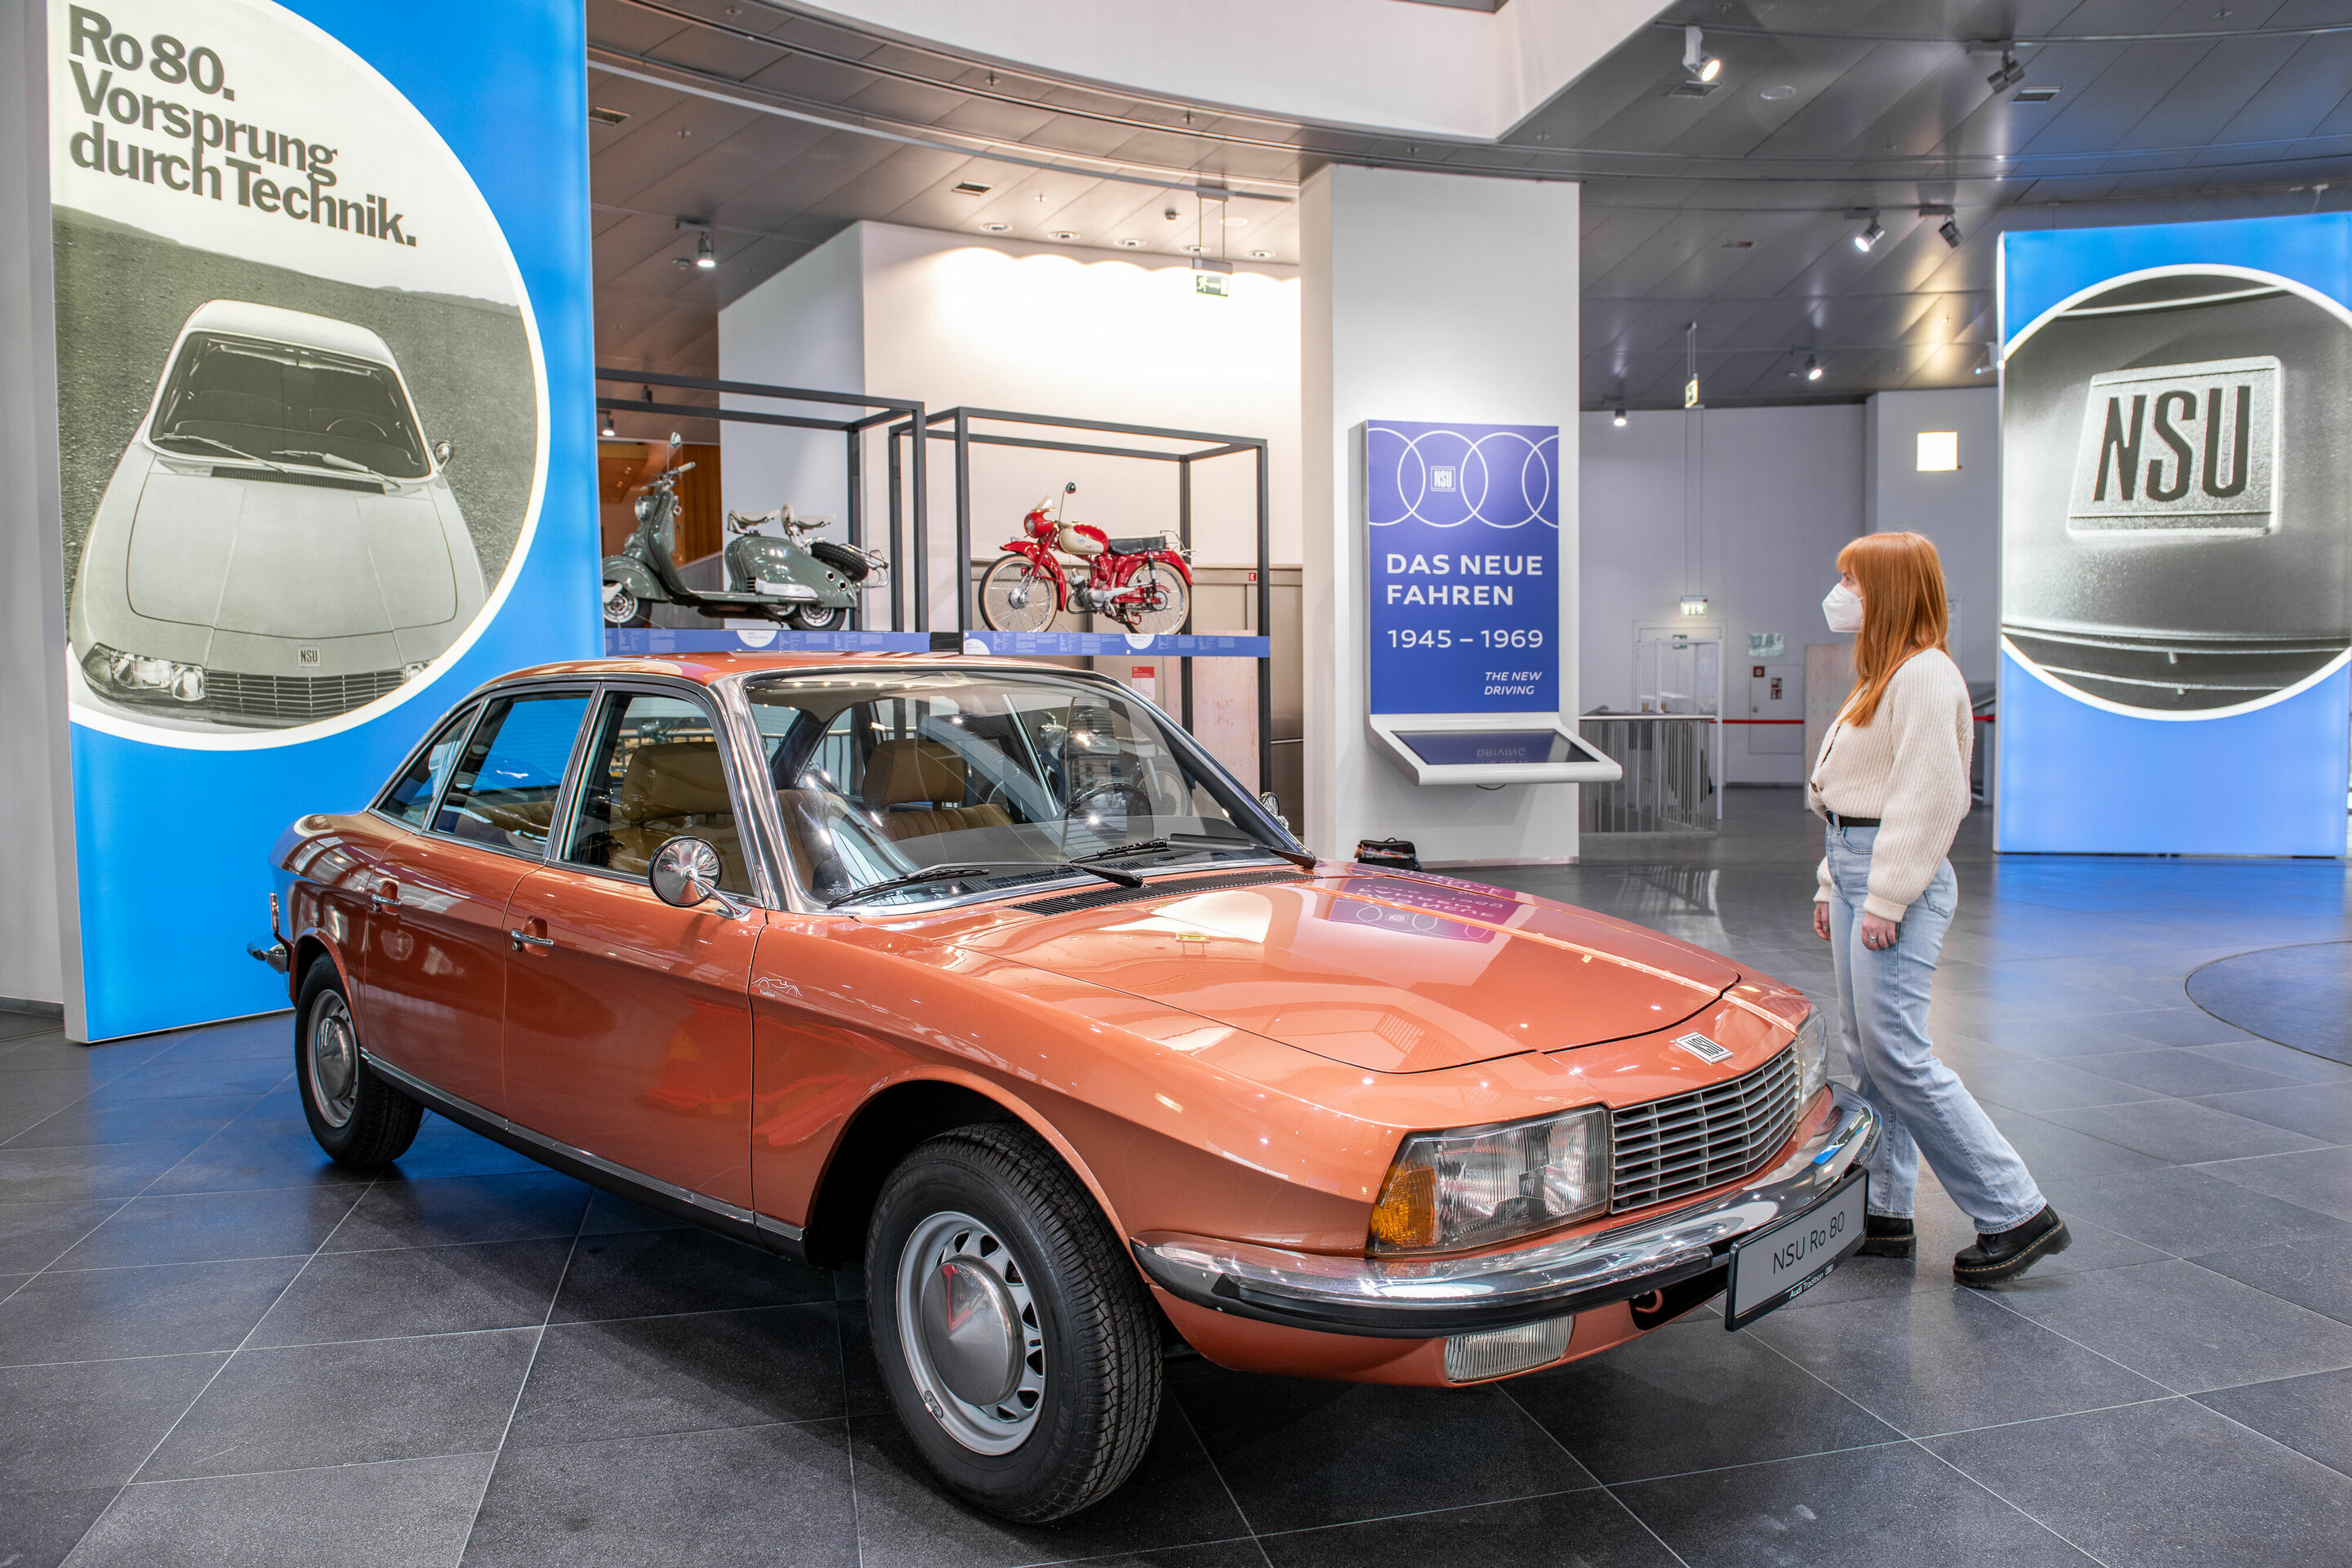 Off to the museum via app: Audi Tradition goes digital with its new special exhibition “Der fünfte Ring“